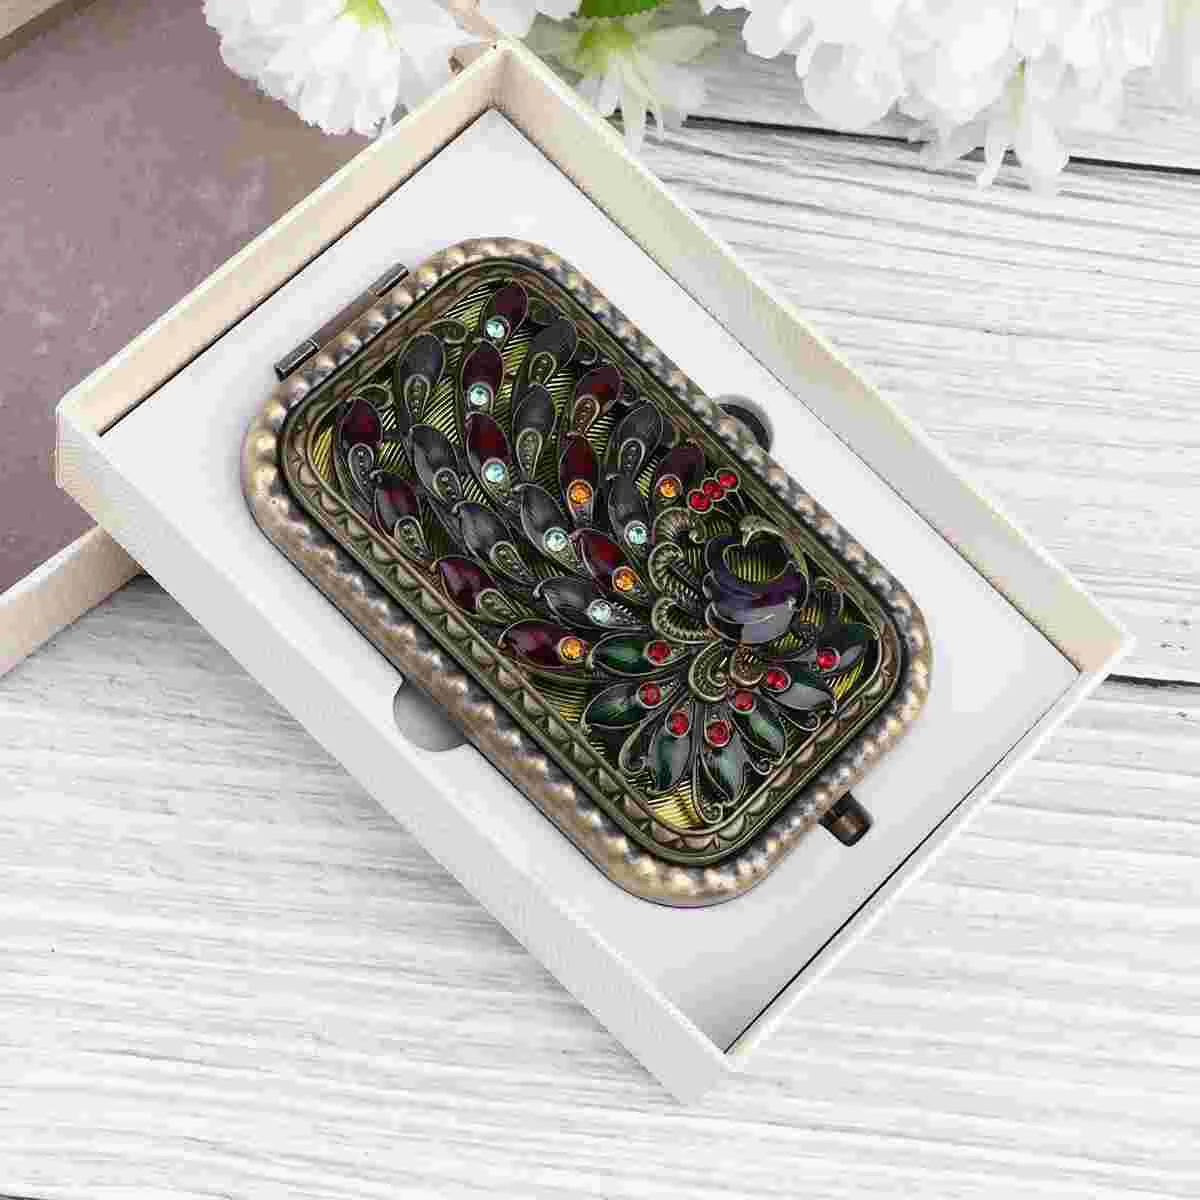 Mirror Compact Makeup Vintage Pocket Purse Foldable Double Mini Women Vanity Portable Side Travel Handheld Purses Mirrors 12 pcs mini phone book tiny books address the call telephone small for purse contact